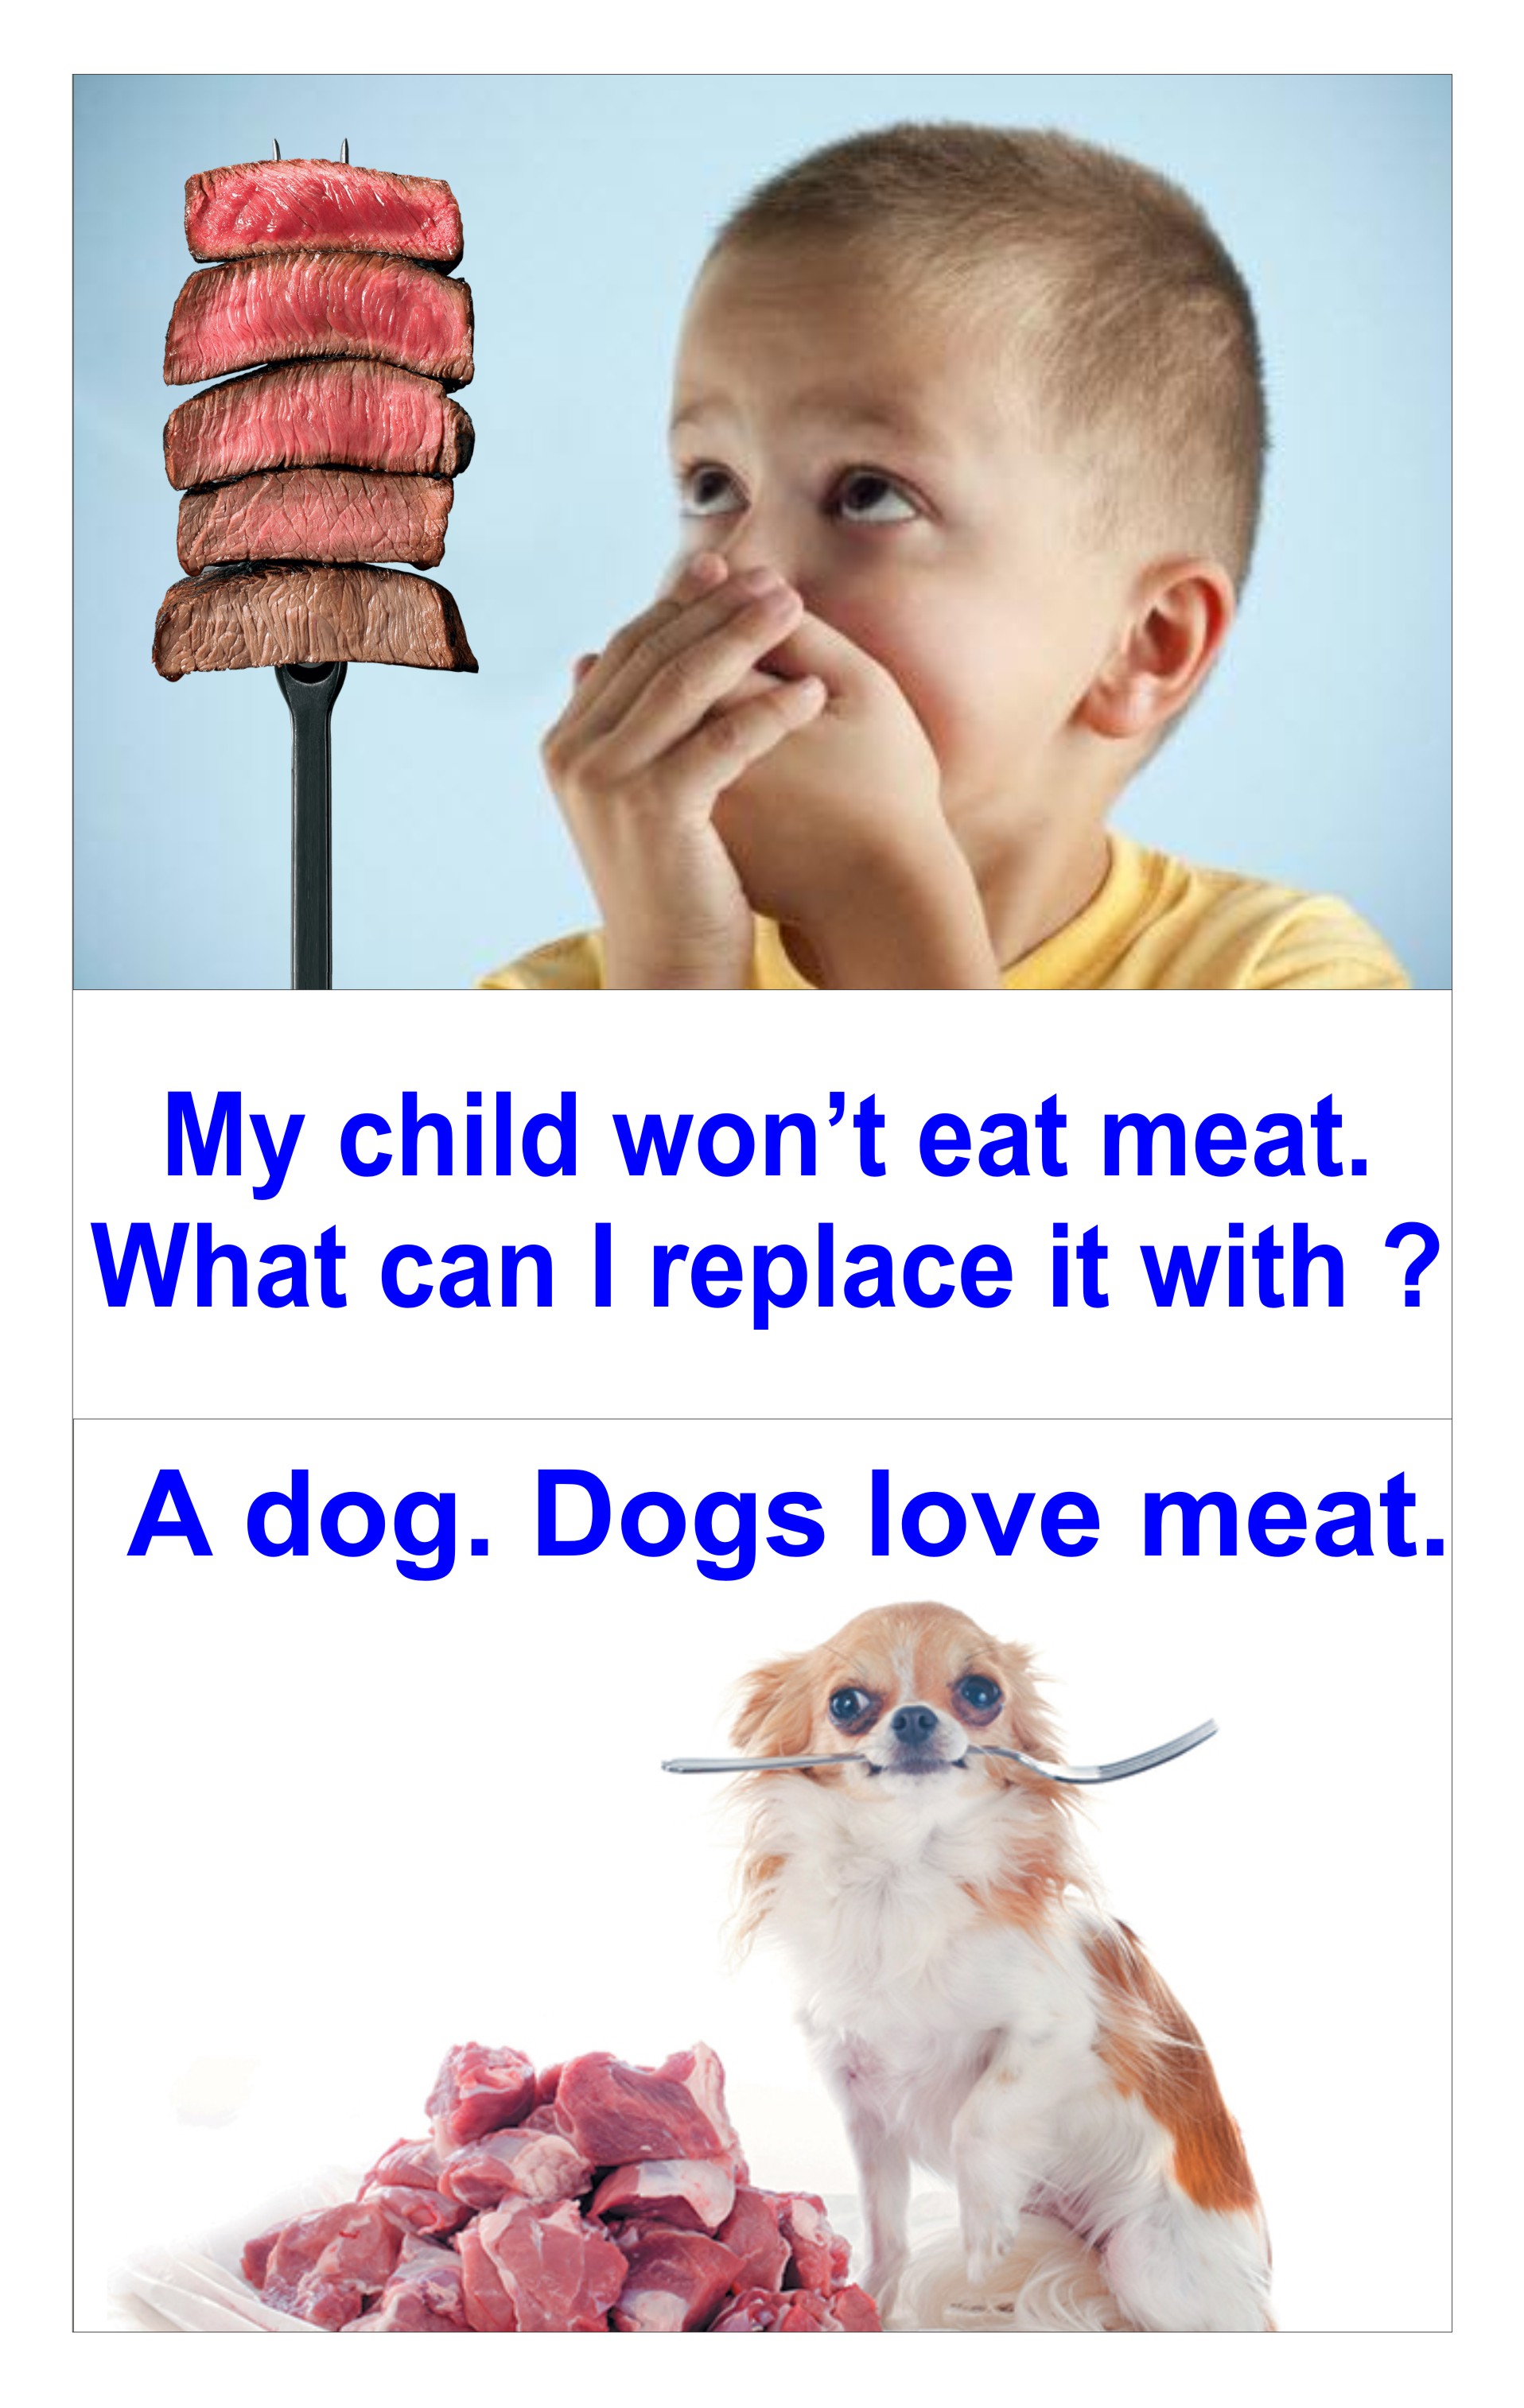 my medical vacations - My child won't eat meat. What can I replace it with ? A dog. Dogs love meat.